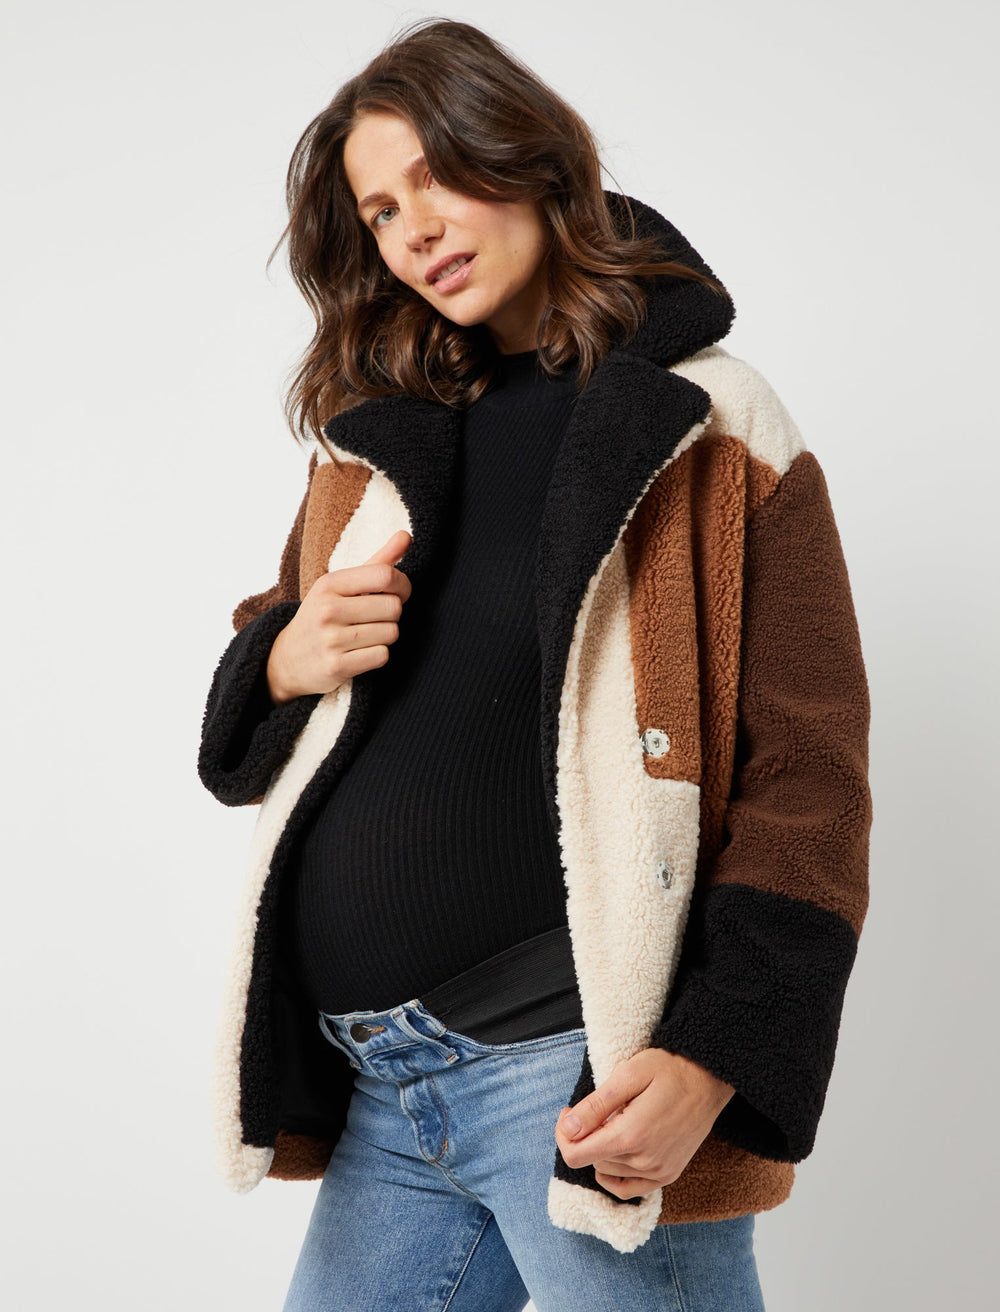 Stylish Maternity Coats for the Winter - Project Nursery